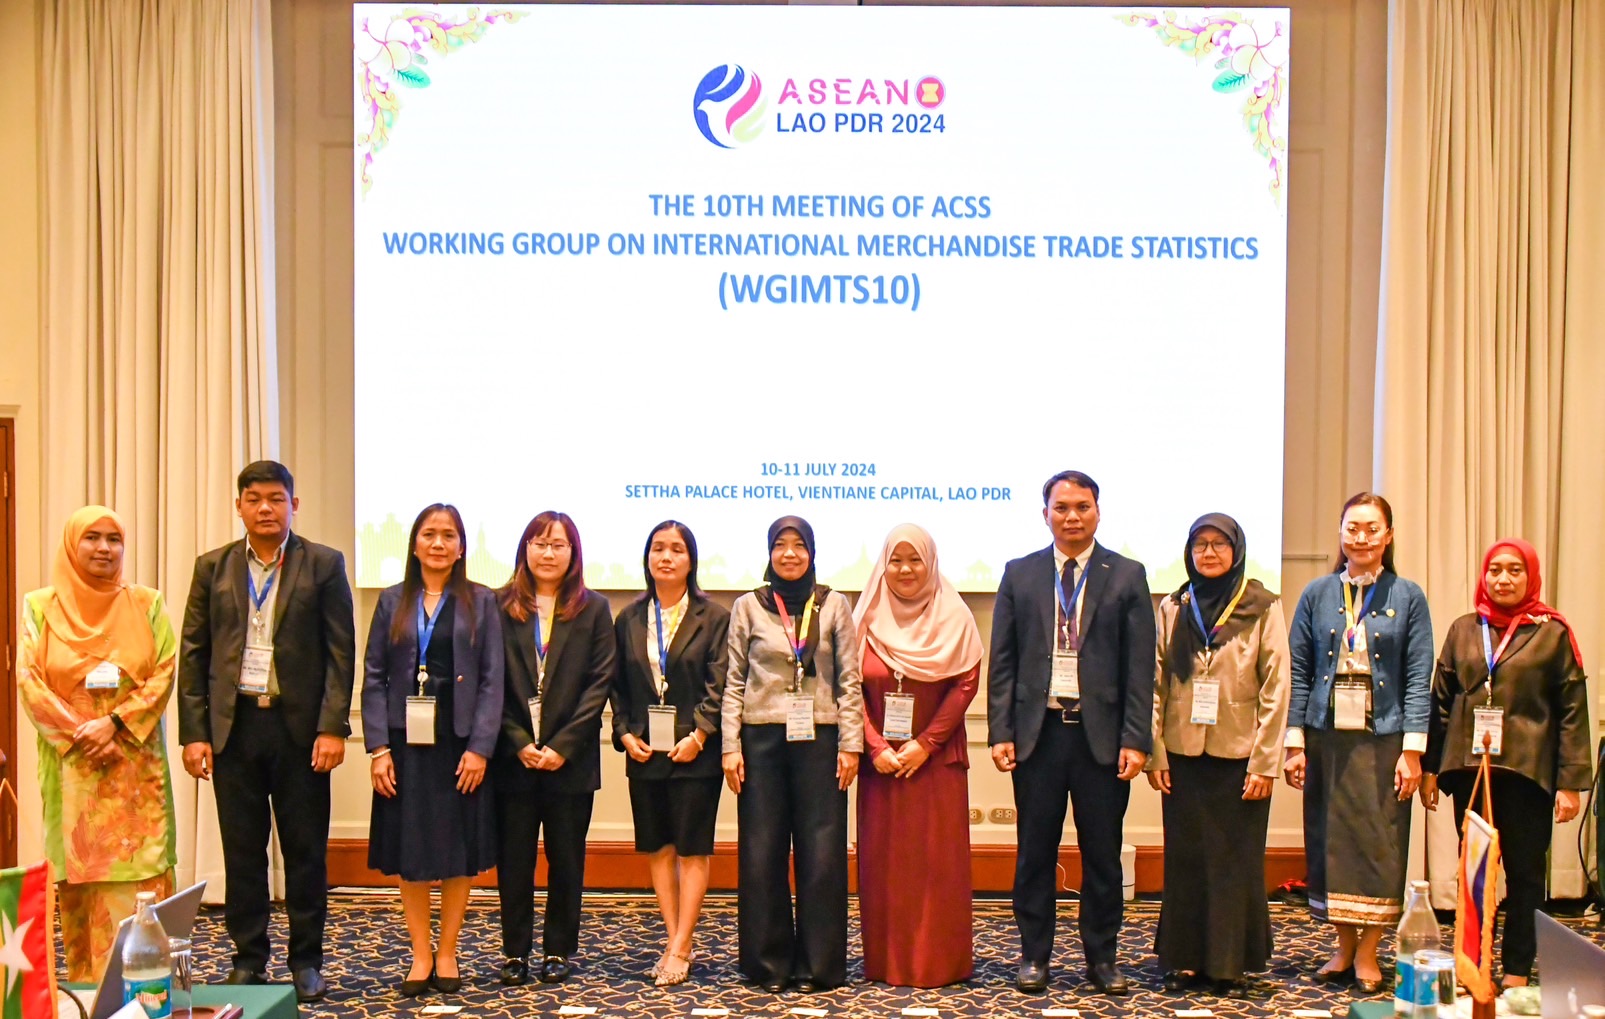 The 10th Meeting of ACSS Working Group on International Merchandise Trade Statistics (WGIMTS10)